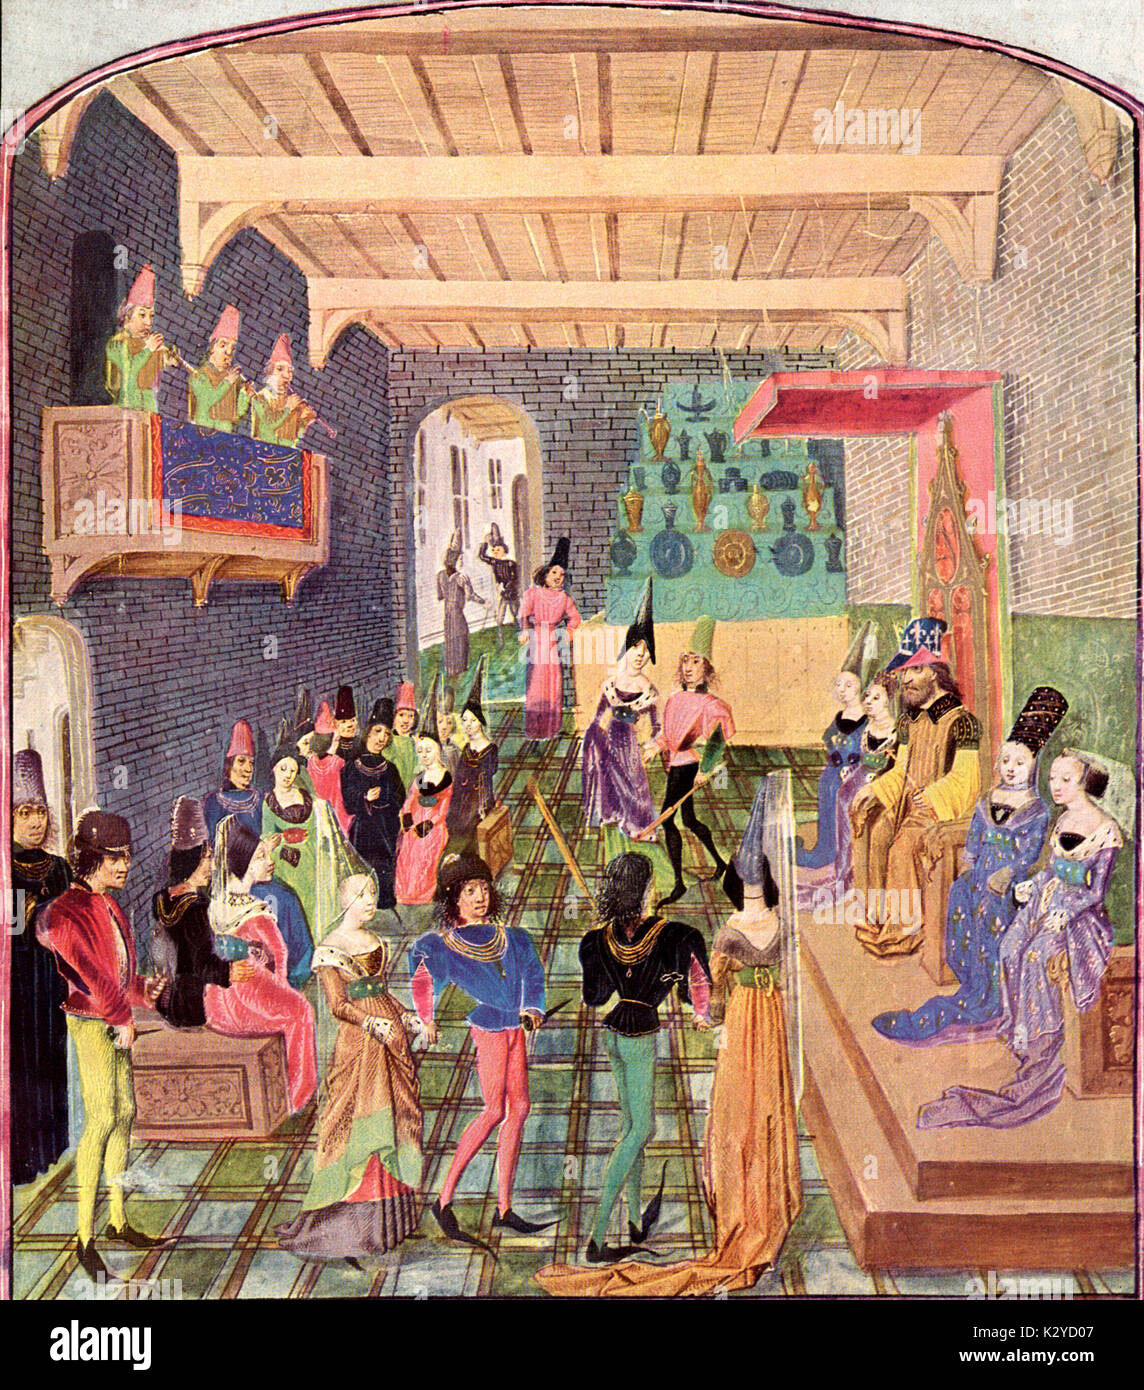 15th century England Basse dance,  with musicians playing cornettos on balcony. 15th century miniature from the English Chronicle of Jean de Waurin. Nobility sitting on dais with couples dancing.  Banquet, feast, party. Stock Photo